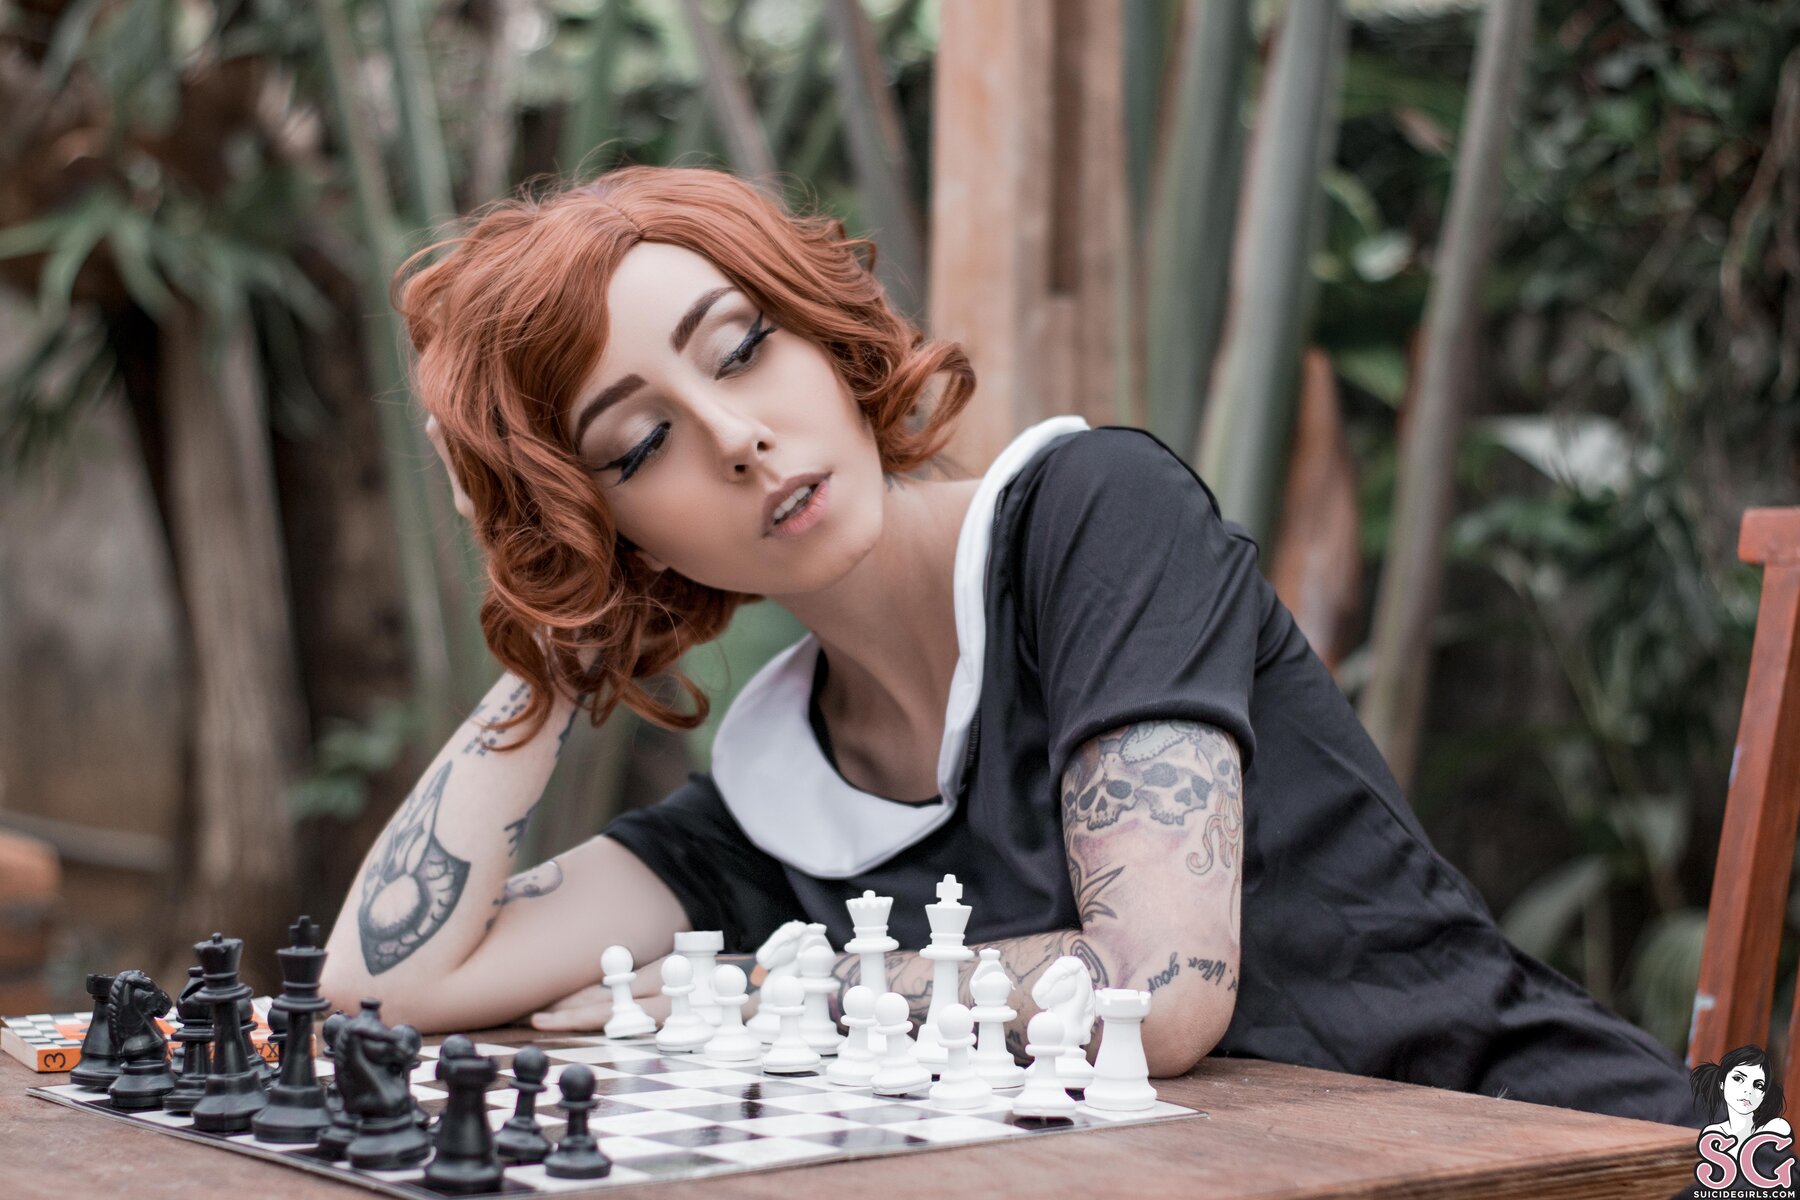 People 1800x1200 Suicide Girls redhead cosplay photography model looking sideways looking away table hands on head women open mouth tattoo tattoo sleeve chess short hair Beth Harmon depth of field outdoors women outdoors sitting The Queen's Gambit Evelyn Oliveira